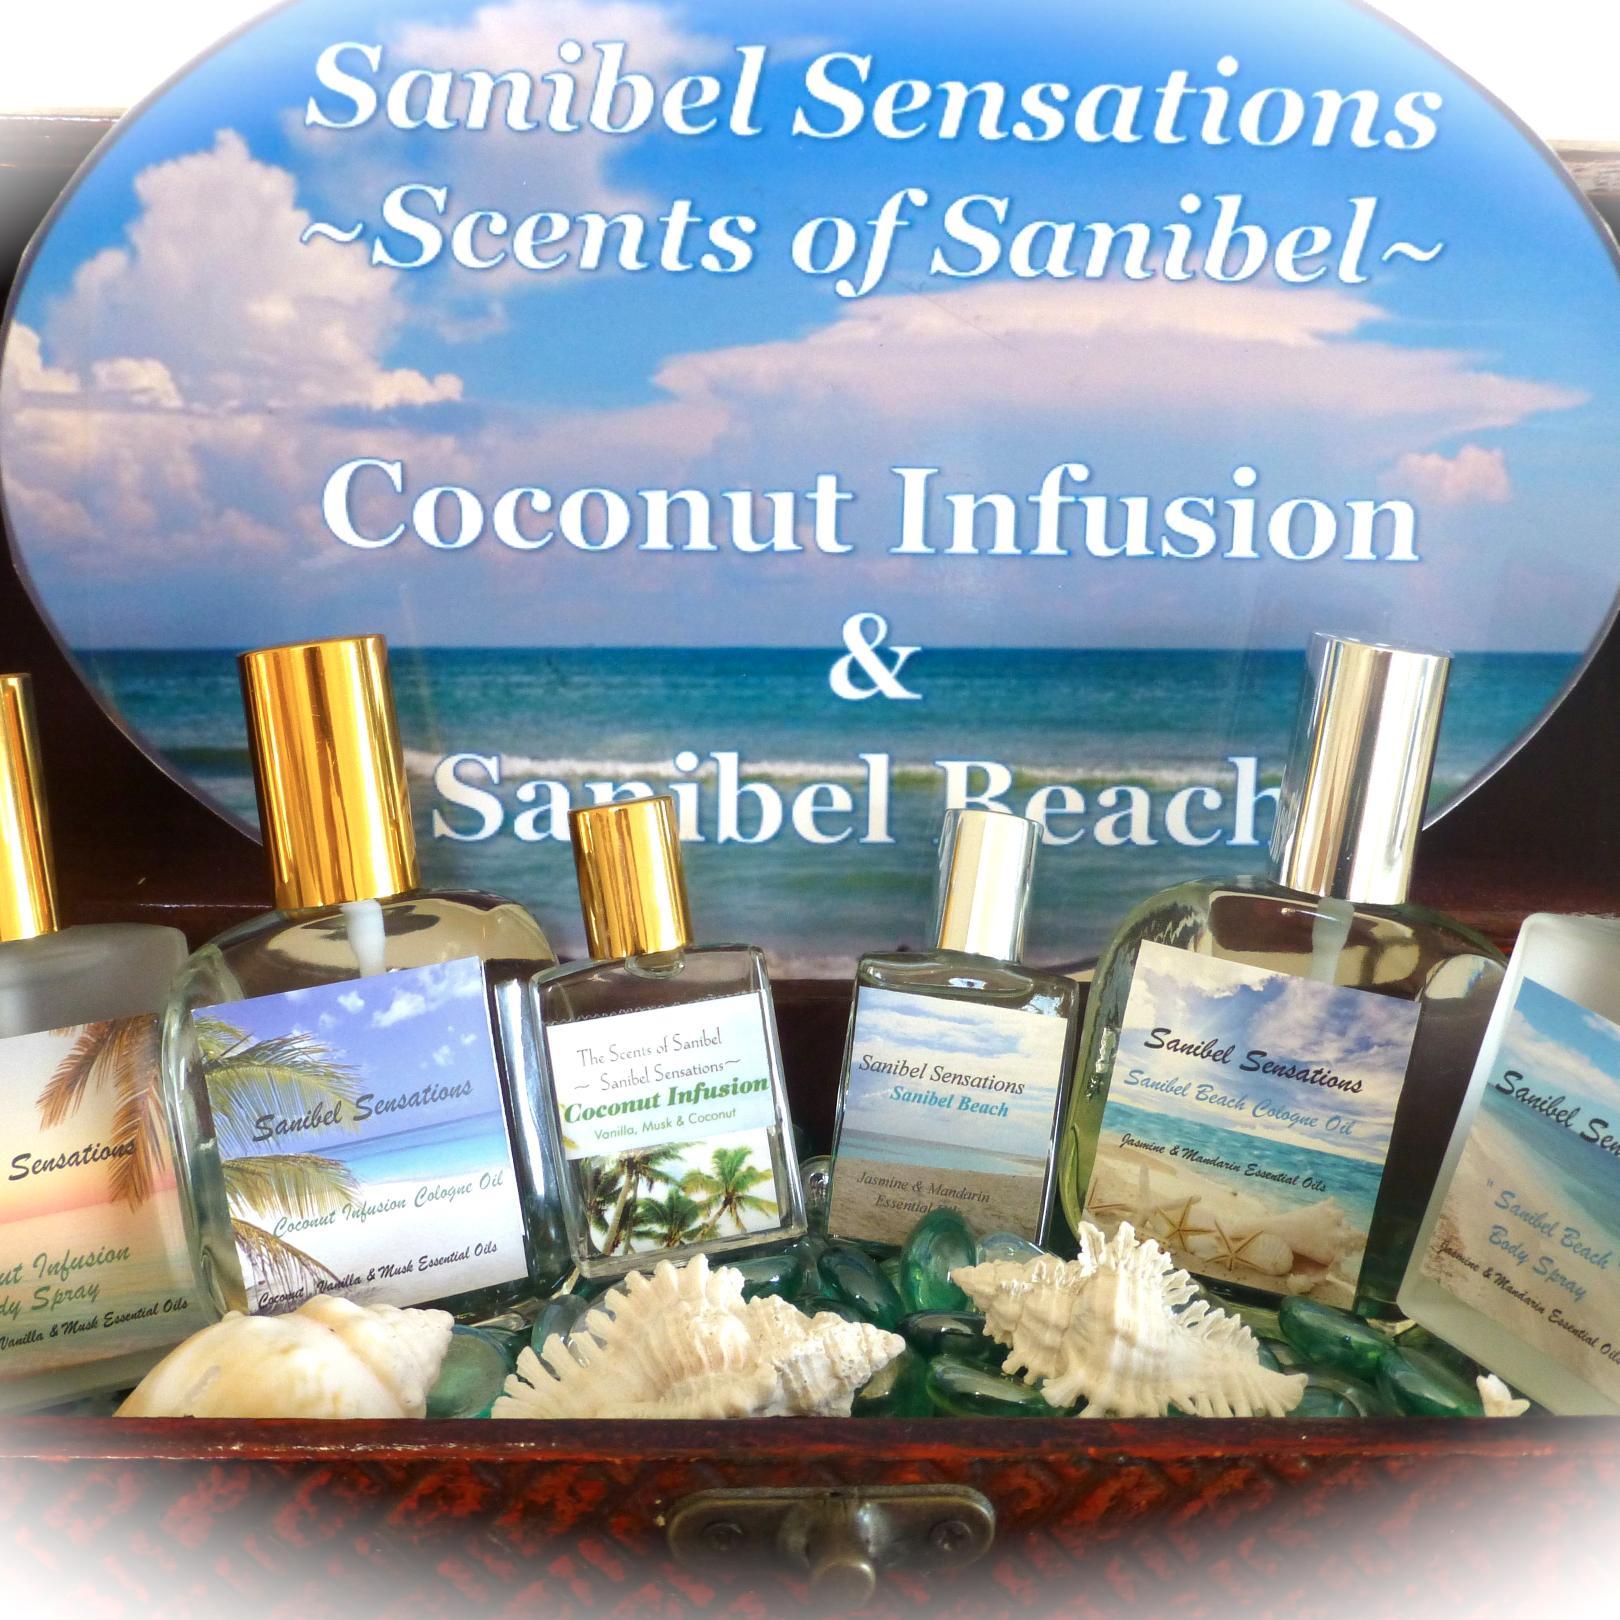 Sanibel Sensations / Sanibel Moments is a Visual Scent therapy business featuring Captivating Sanibel Island Photography & Tropical  Island Fragrances!